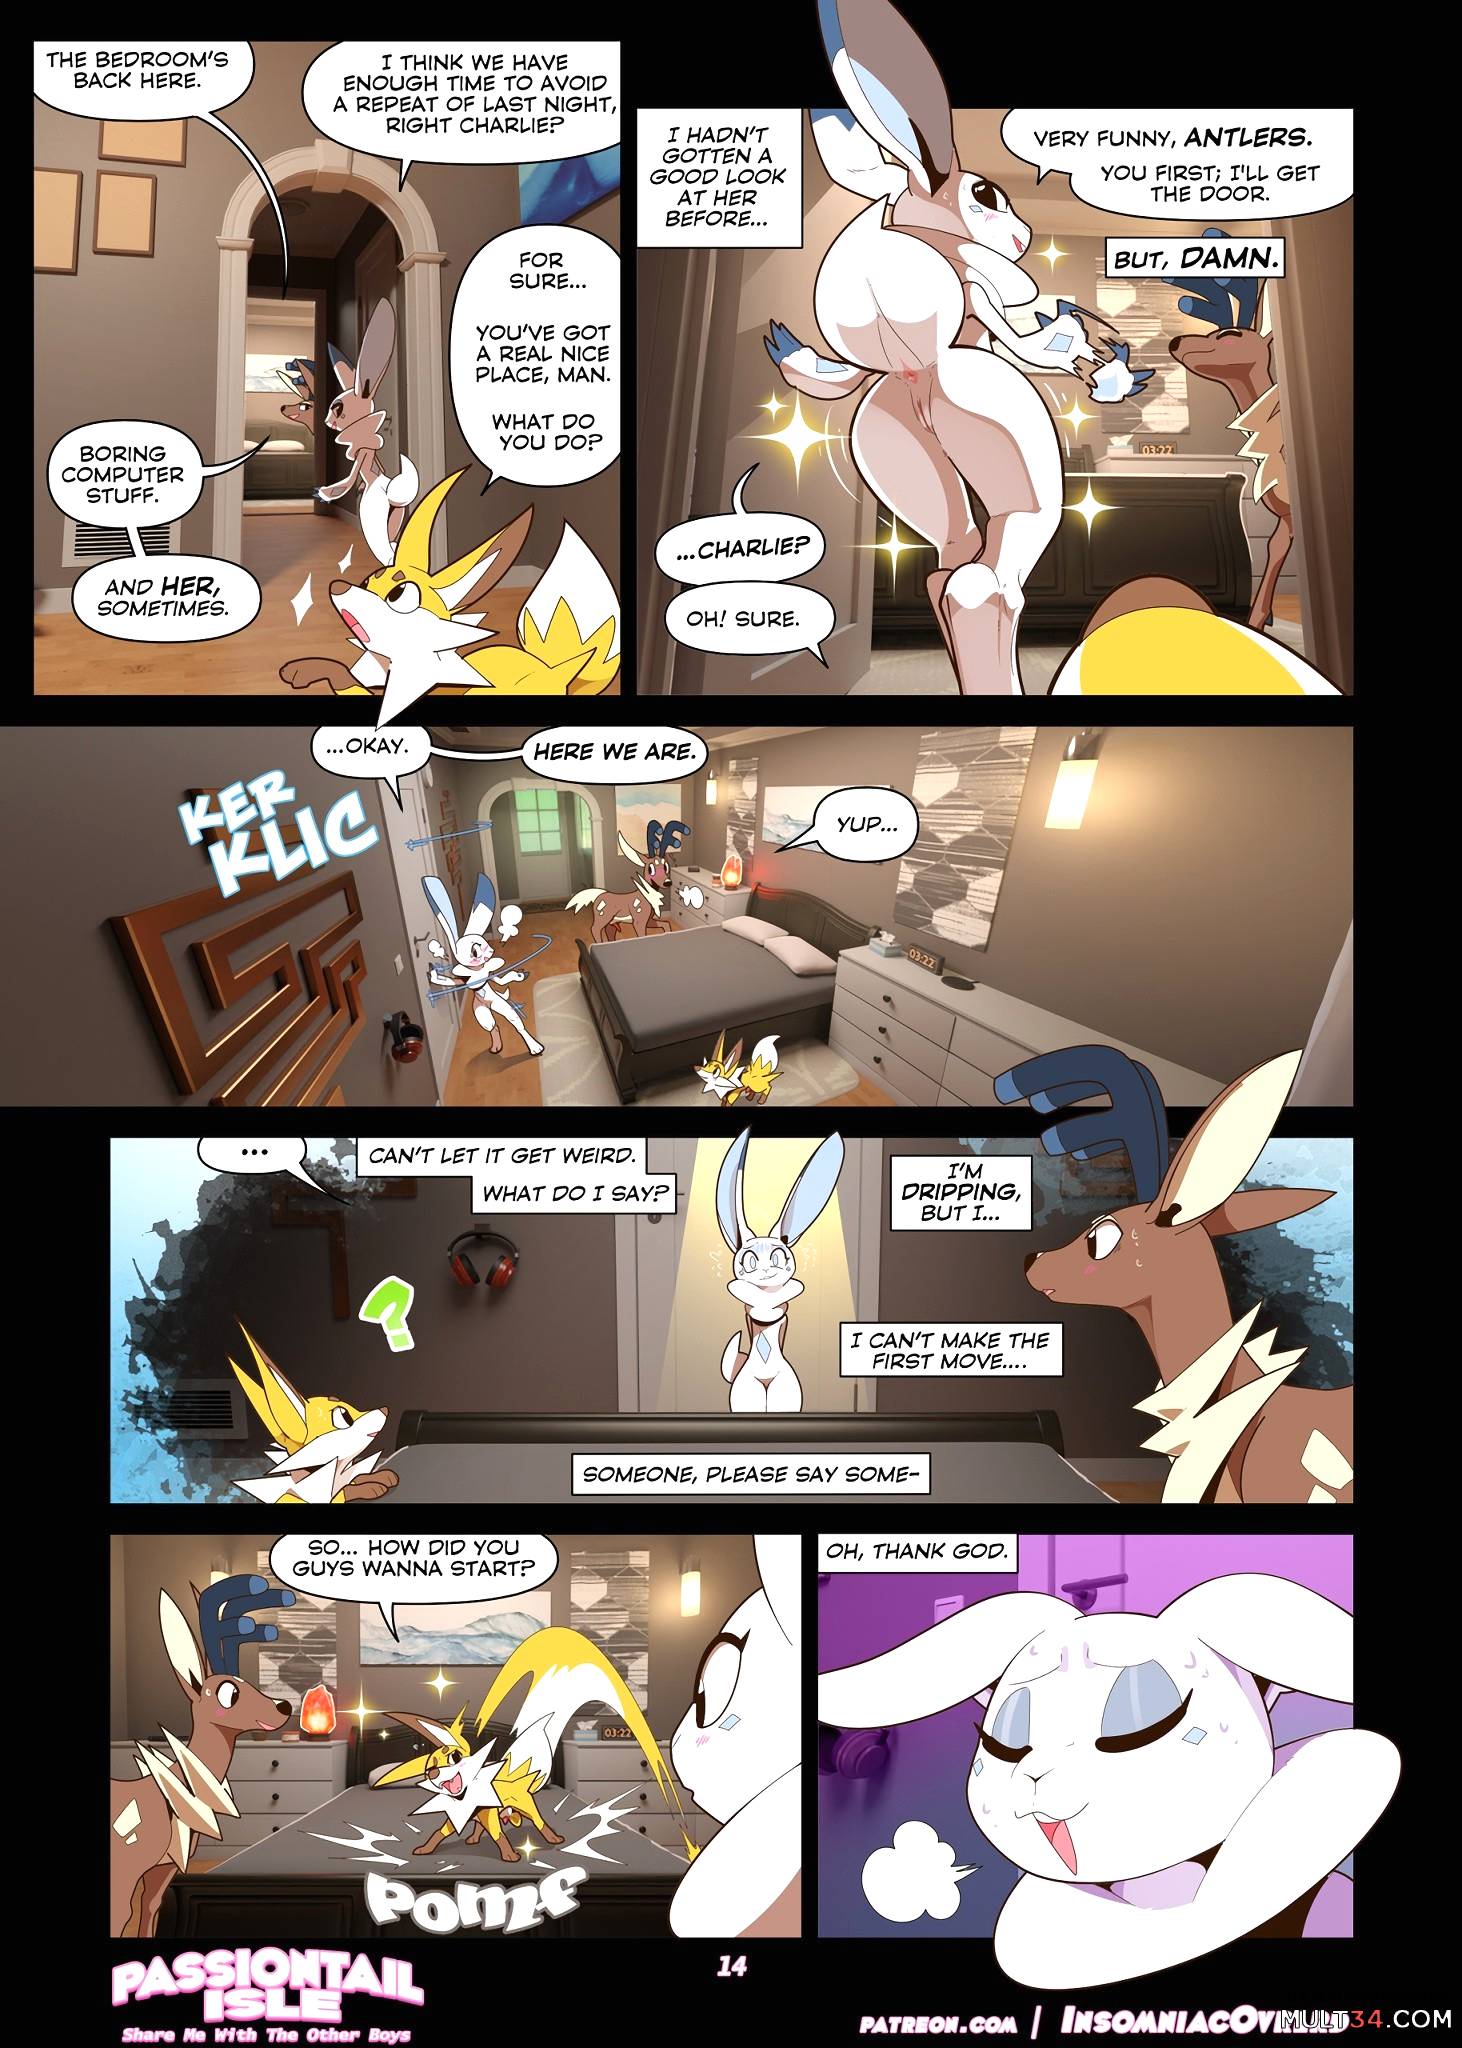 Passiontail Isle: Share Me With The Other Boys page 15